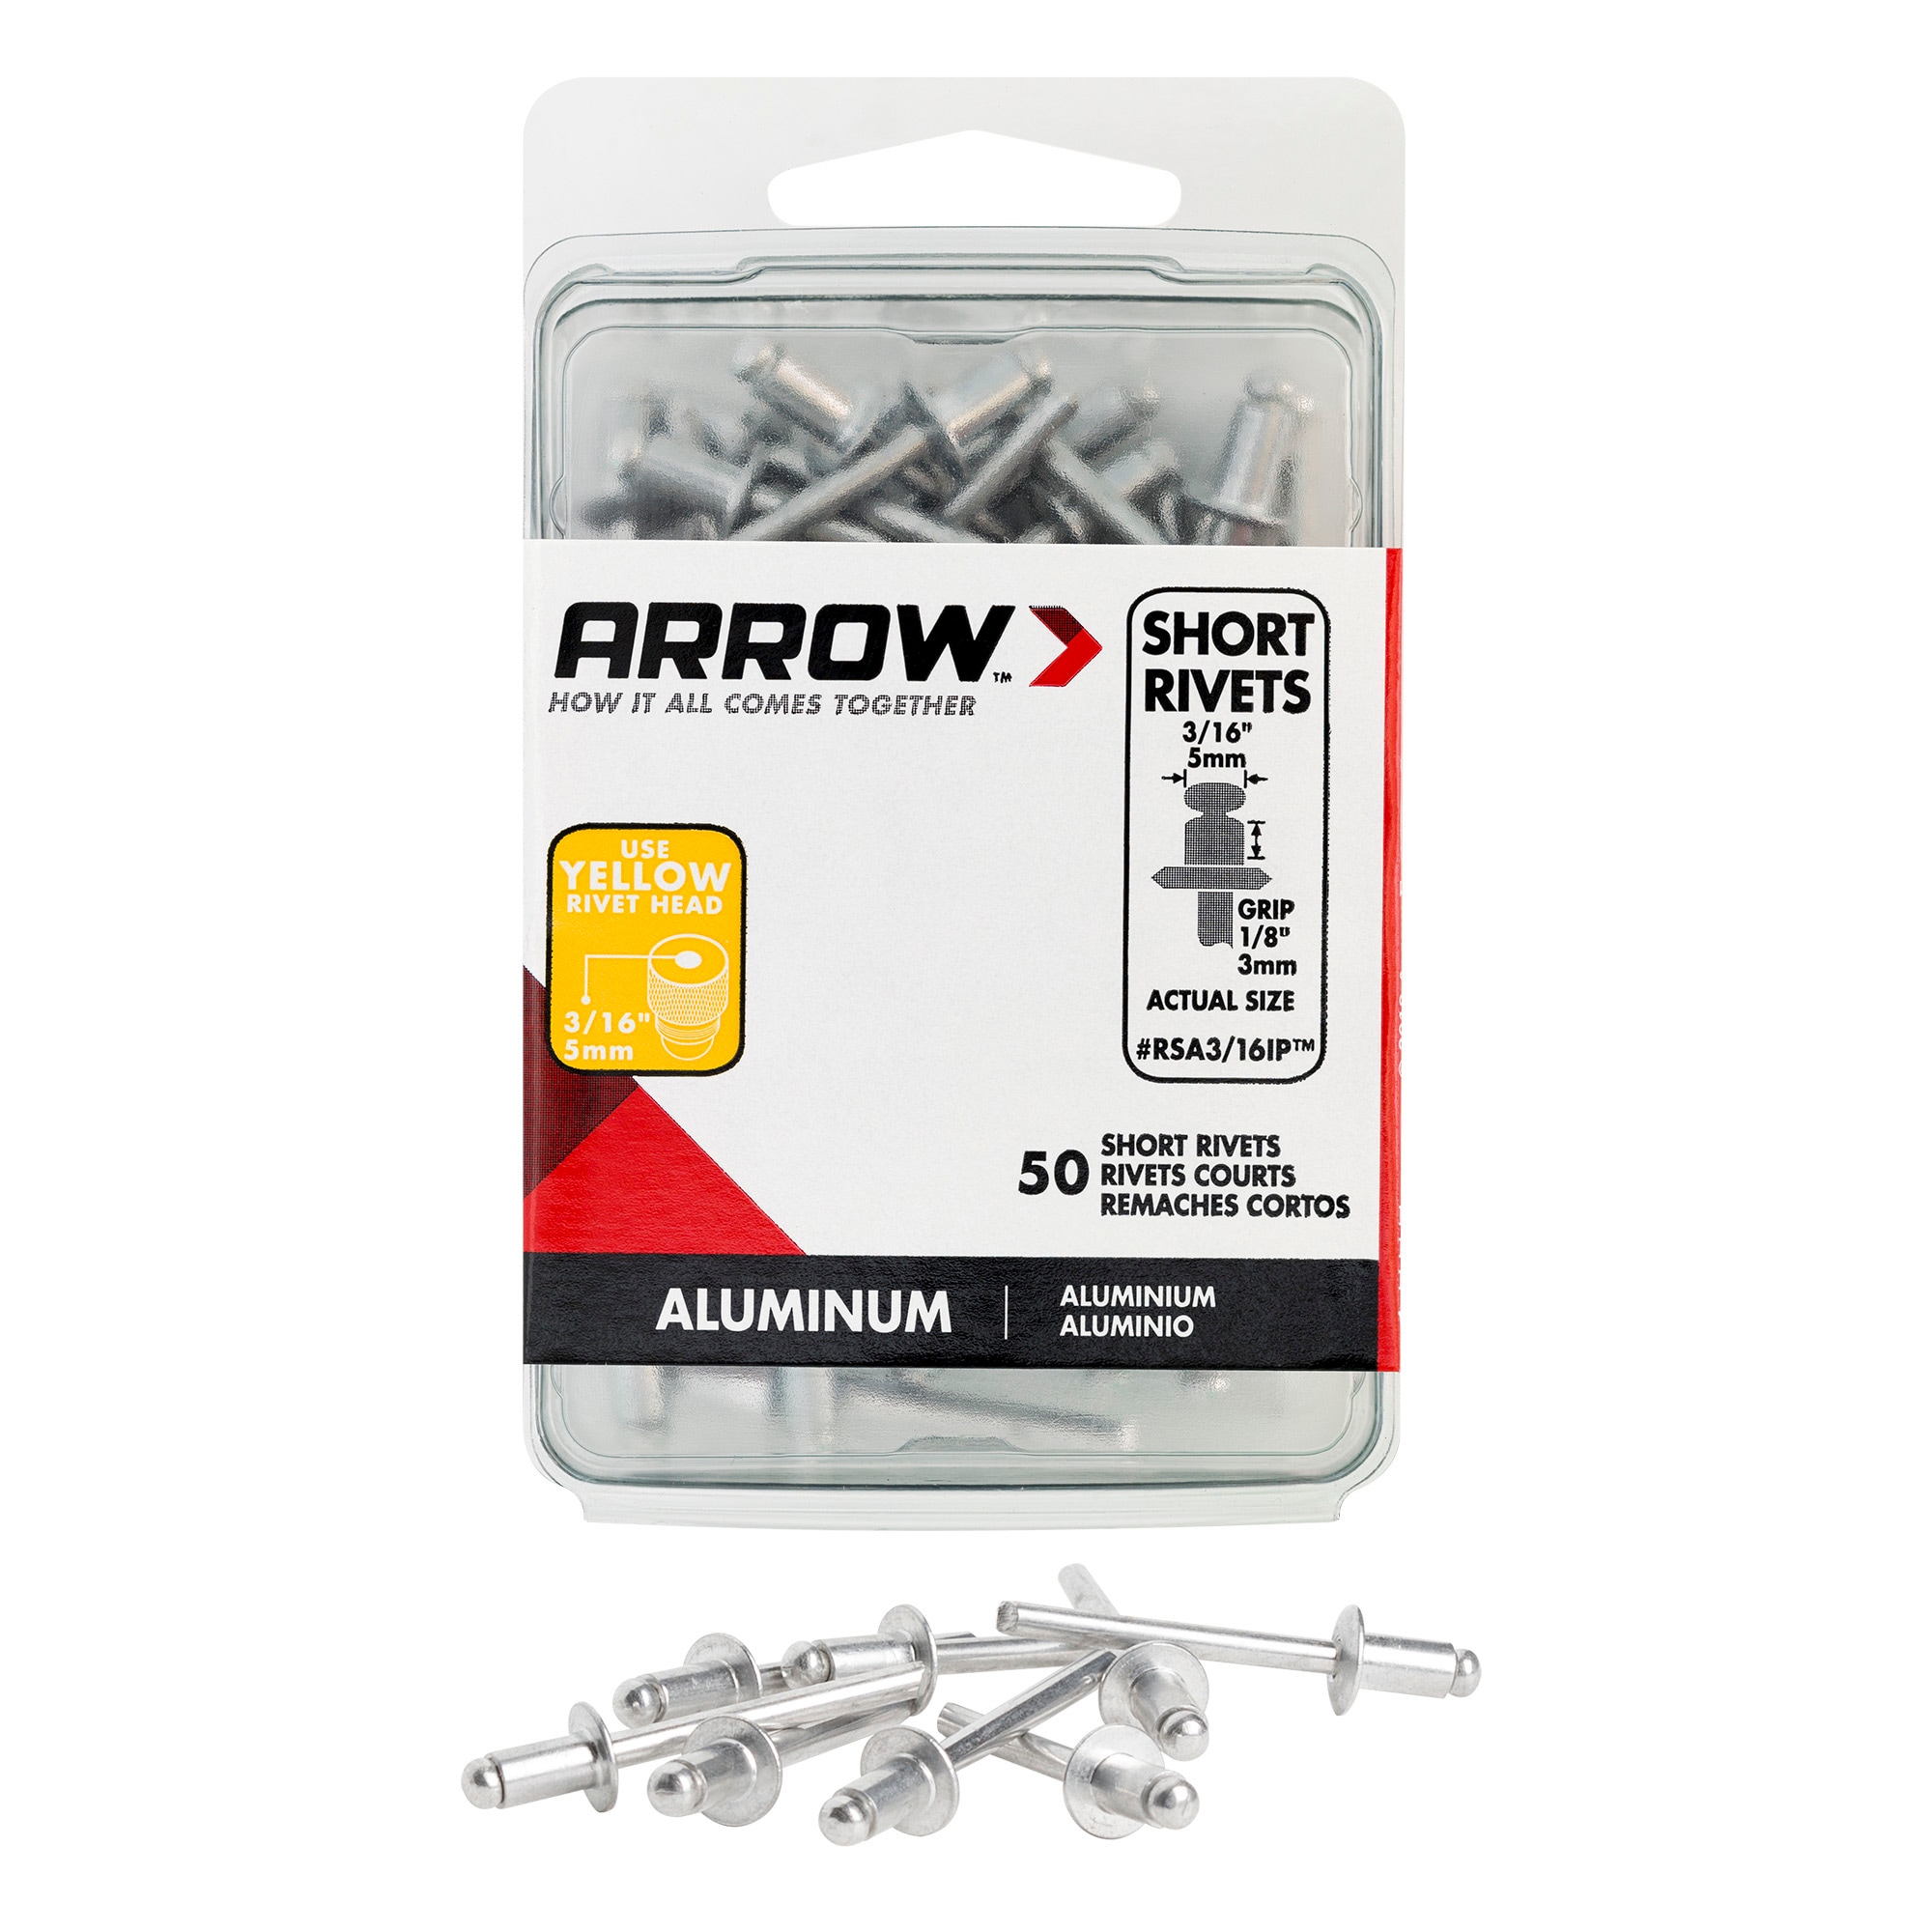 Metal D-ring Screw Rivets, Diy Accessories Modification Kit, With